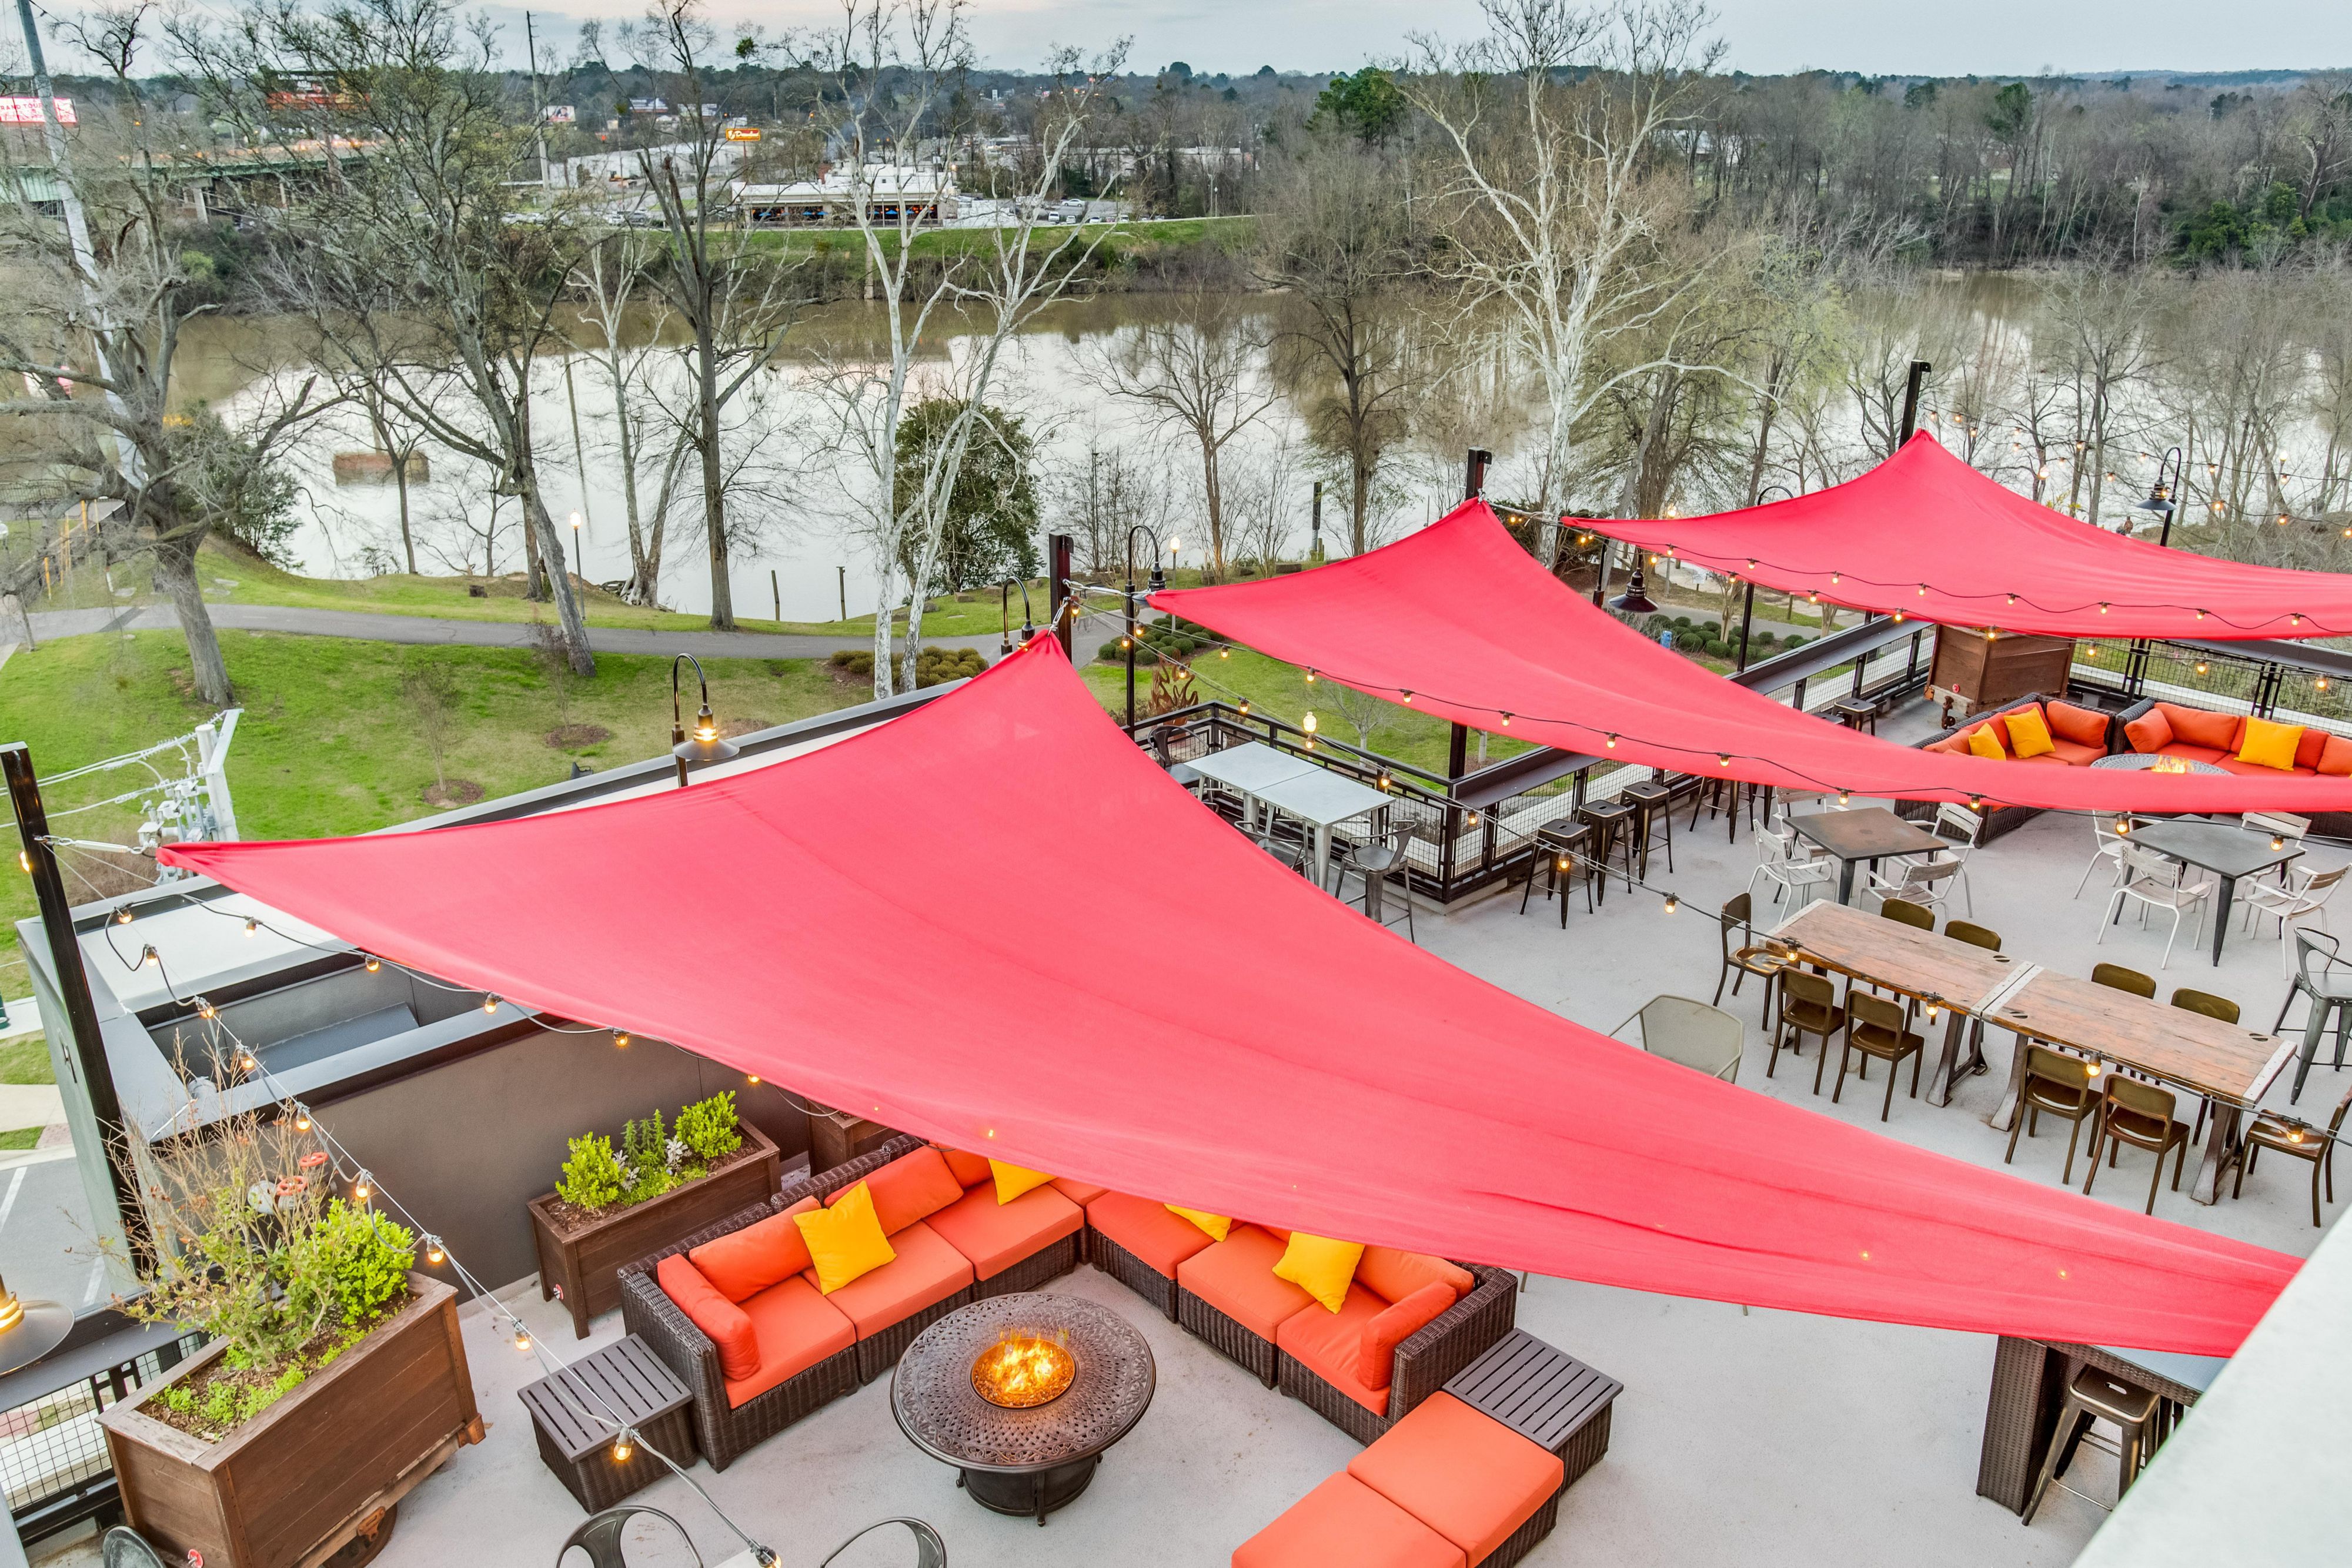 The Lookout is located atop the Hotel Indigo Tuscaloosa Downtown with stunning views of the Black Warrior River and downtown. Unwind with a cocktail near the fire pits or enjoy conversational seating with friends during happy hour. The Lookout is close enough to the Tuscaloosa Amphitheater that you can hear the live music from the rooftop.